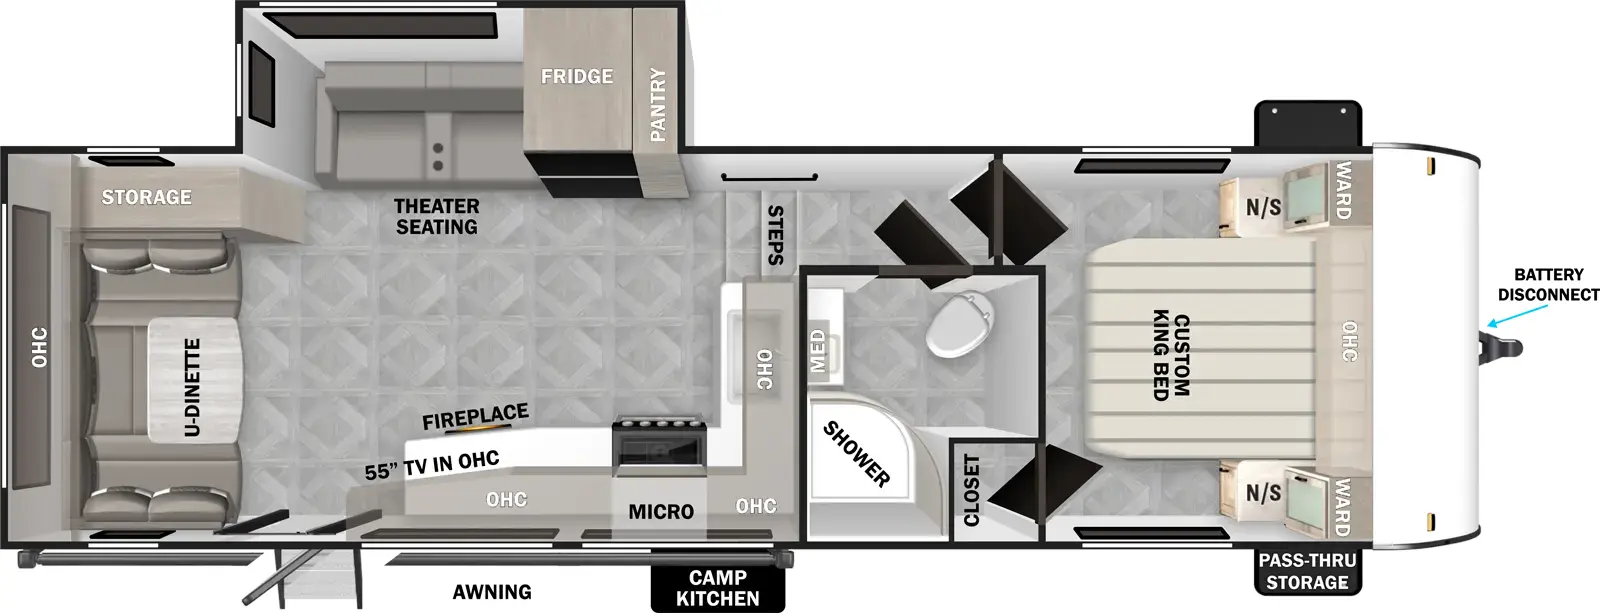 The T25RD has one slideout and one entry. Exterior features battery disconnect, pass-thru storage, camp kitchen, and awning. Interior layout front to back: foot-facing king bed with overhead cabinet, wardrobe with nightstands on each side, and door side closet; door side full bathroom with medicine cabinet; off-door side slideout with pantry, refrigerator, and theater seating; kitchen counter with sink a nd overhead cabinet wraps from inner wall to door side with microwave, cooktop, fireplace, TV in overhead cabinet, and entry; rear u-dinette with overhead cabinet and off-door side storage.